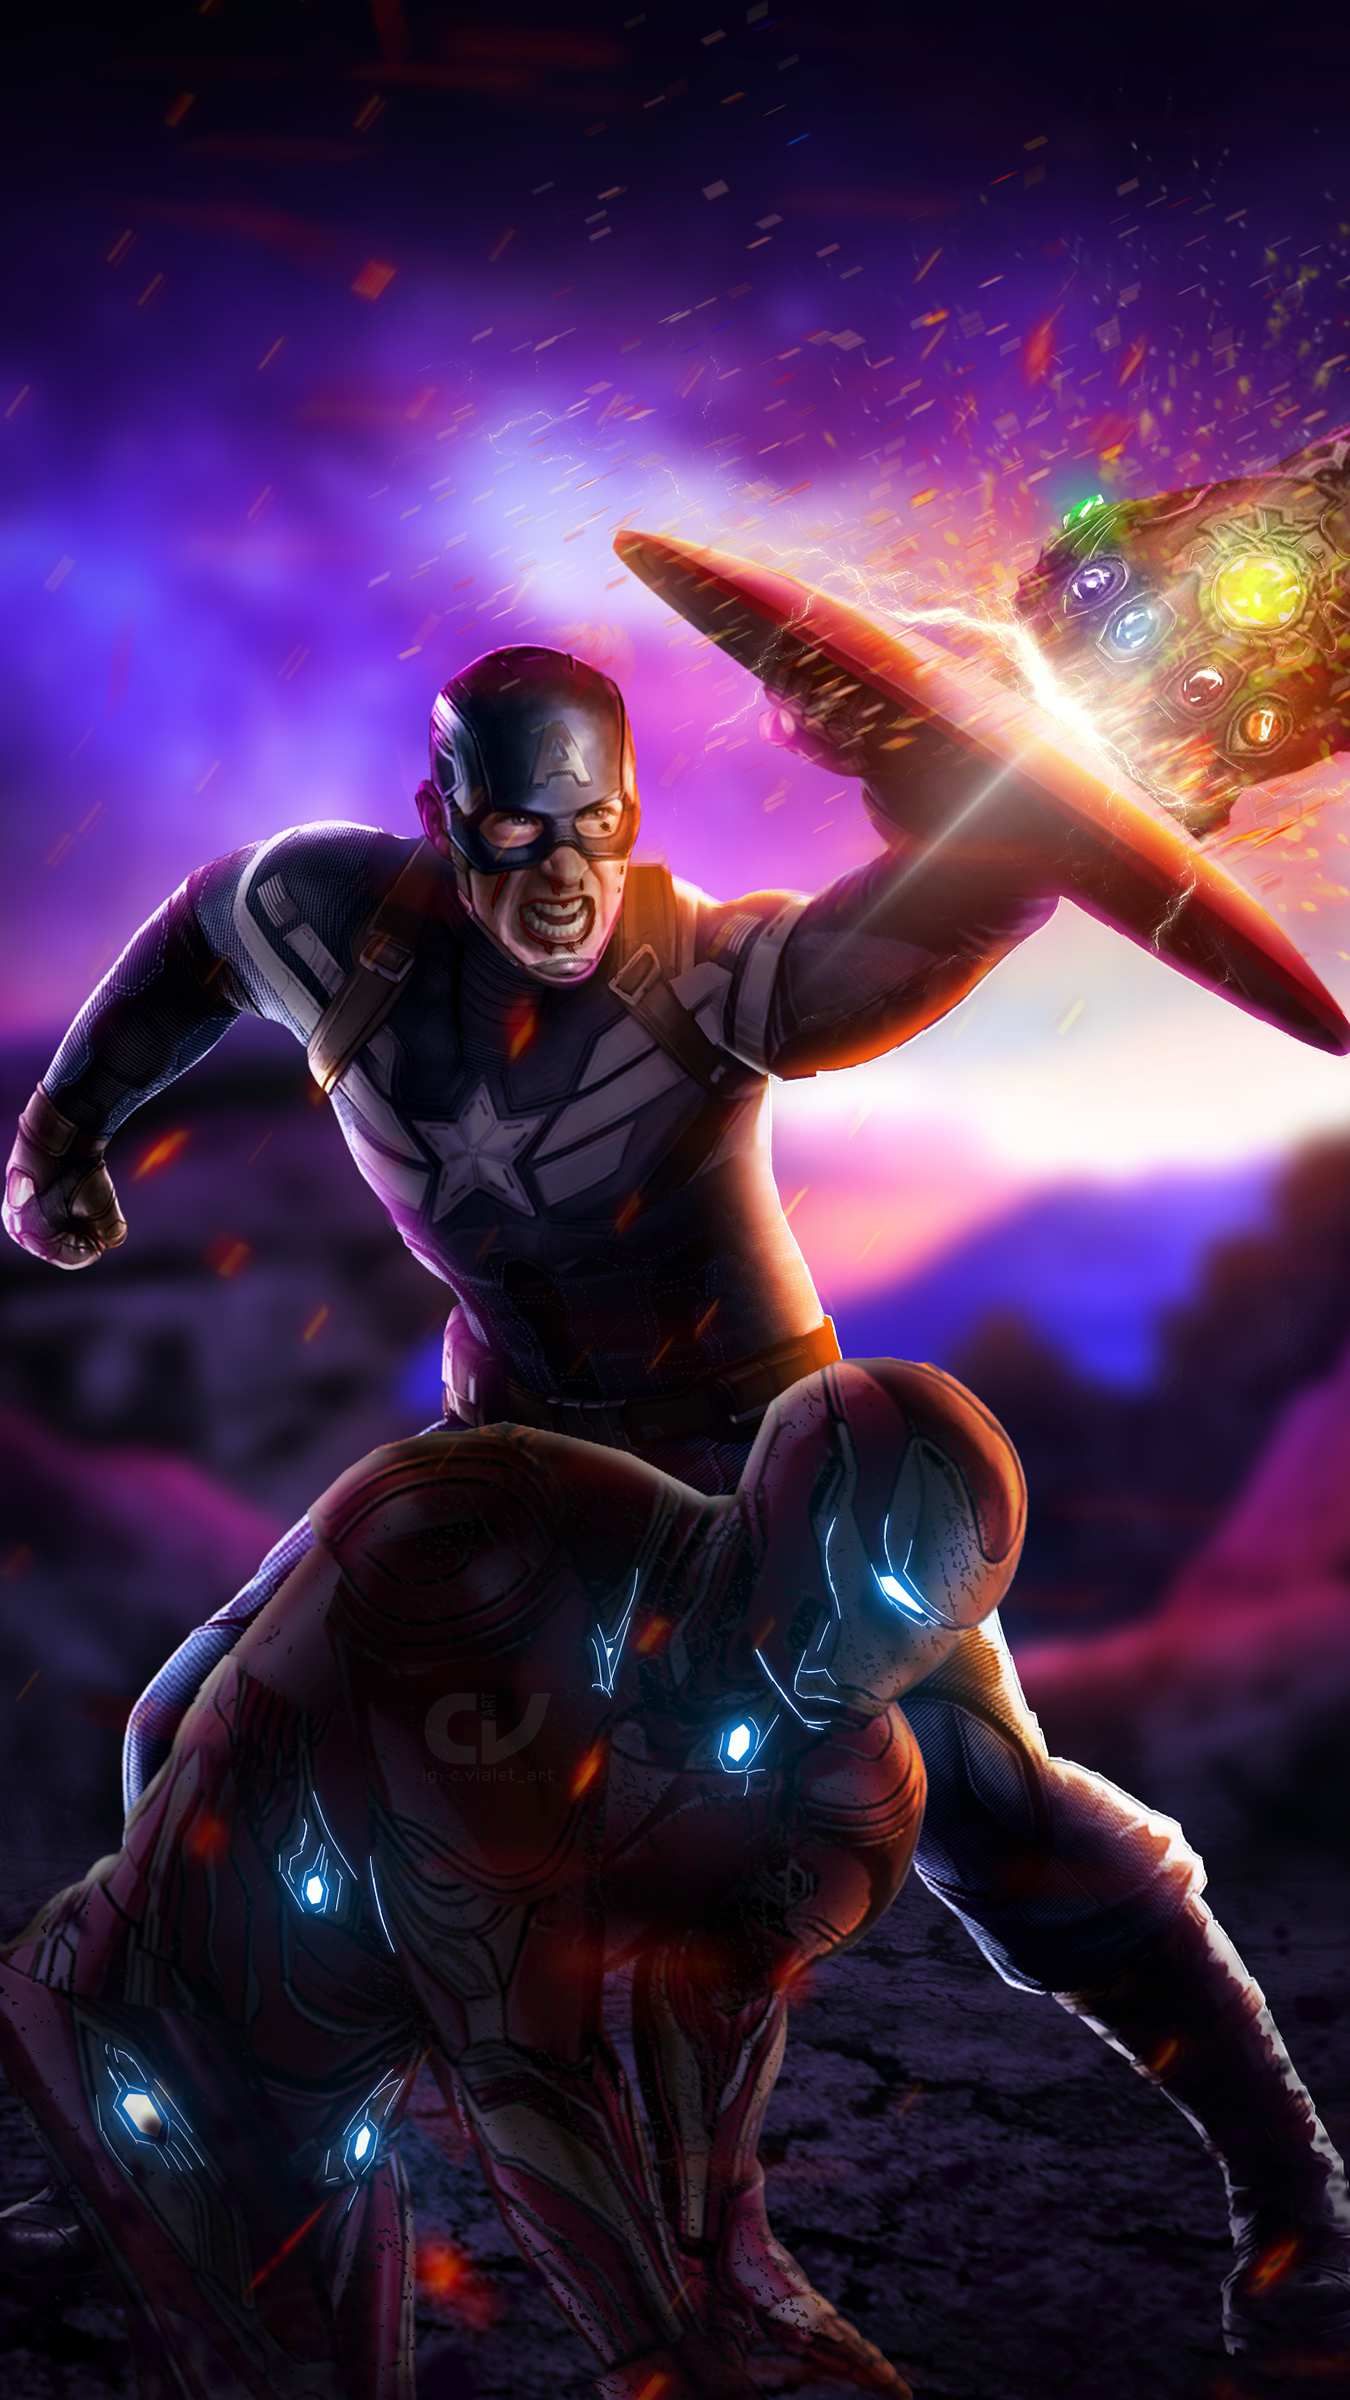 Captain and Tony Fighting Thanos Avengers Endgame iPhone Wallpaper 1350x2400